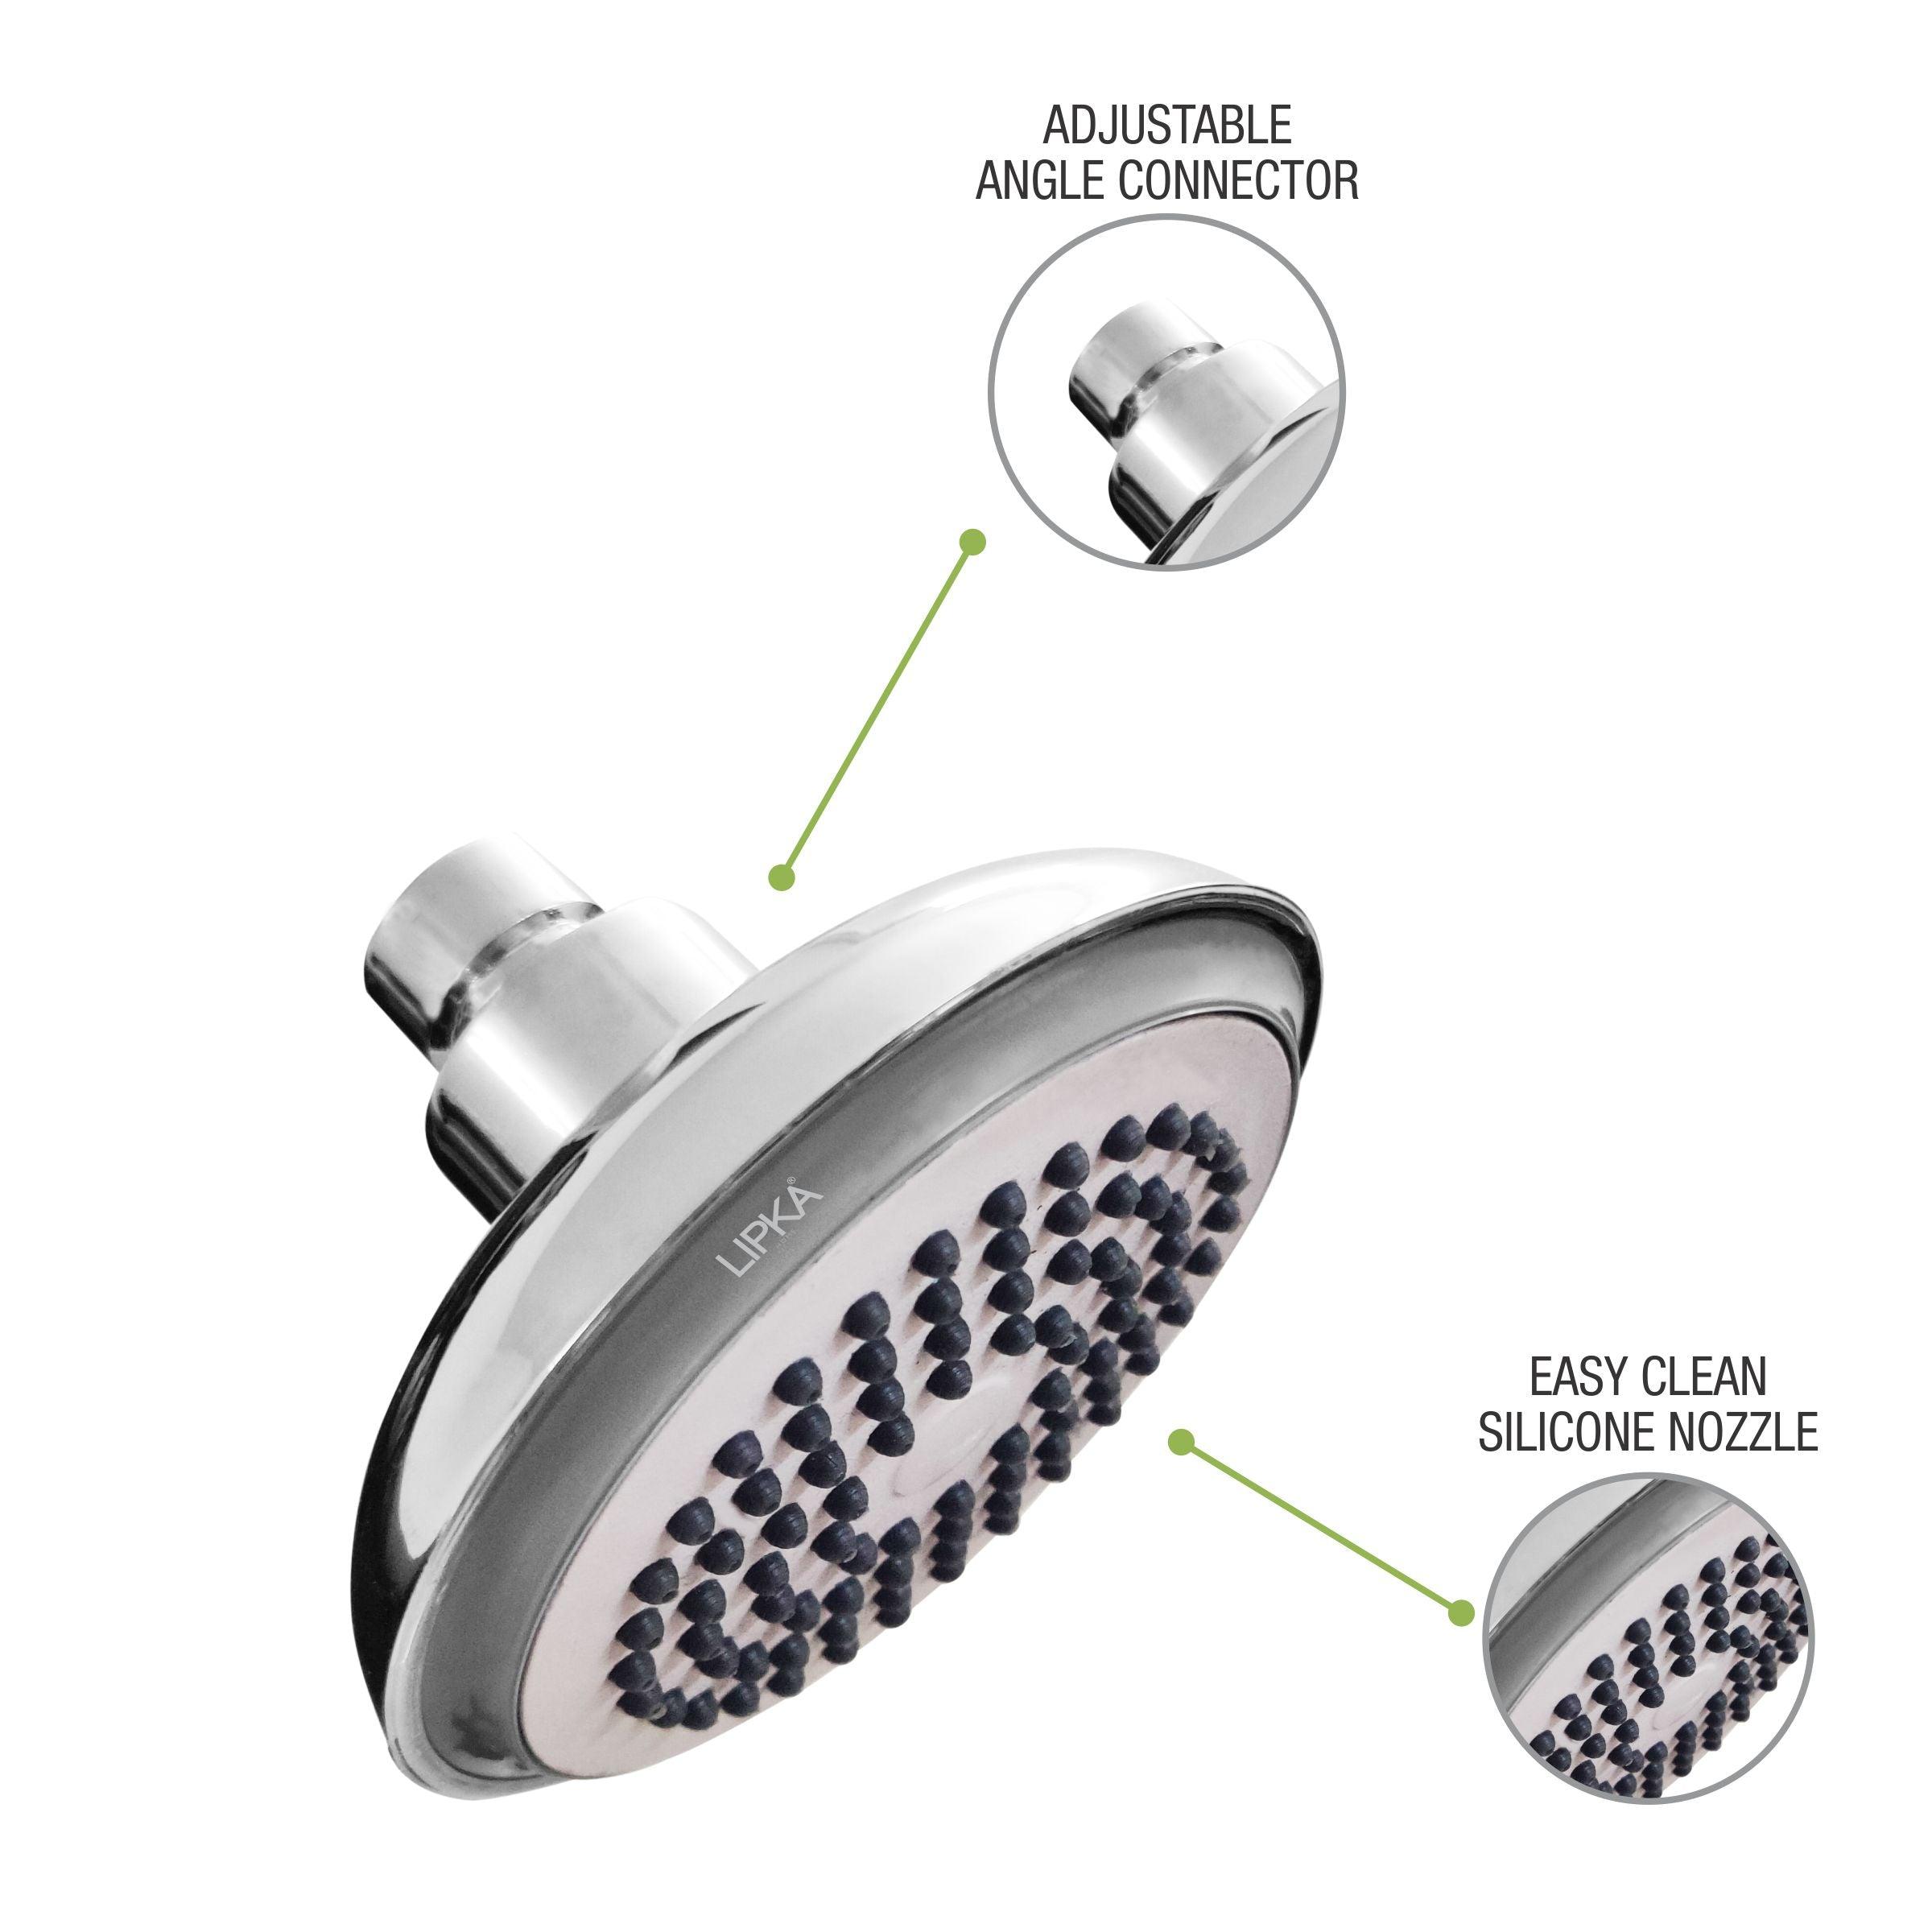 Rio Overhead Shower (4.5 Inches) features